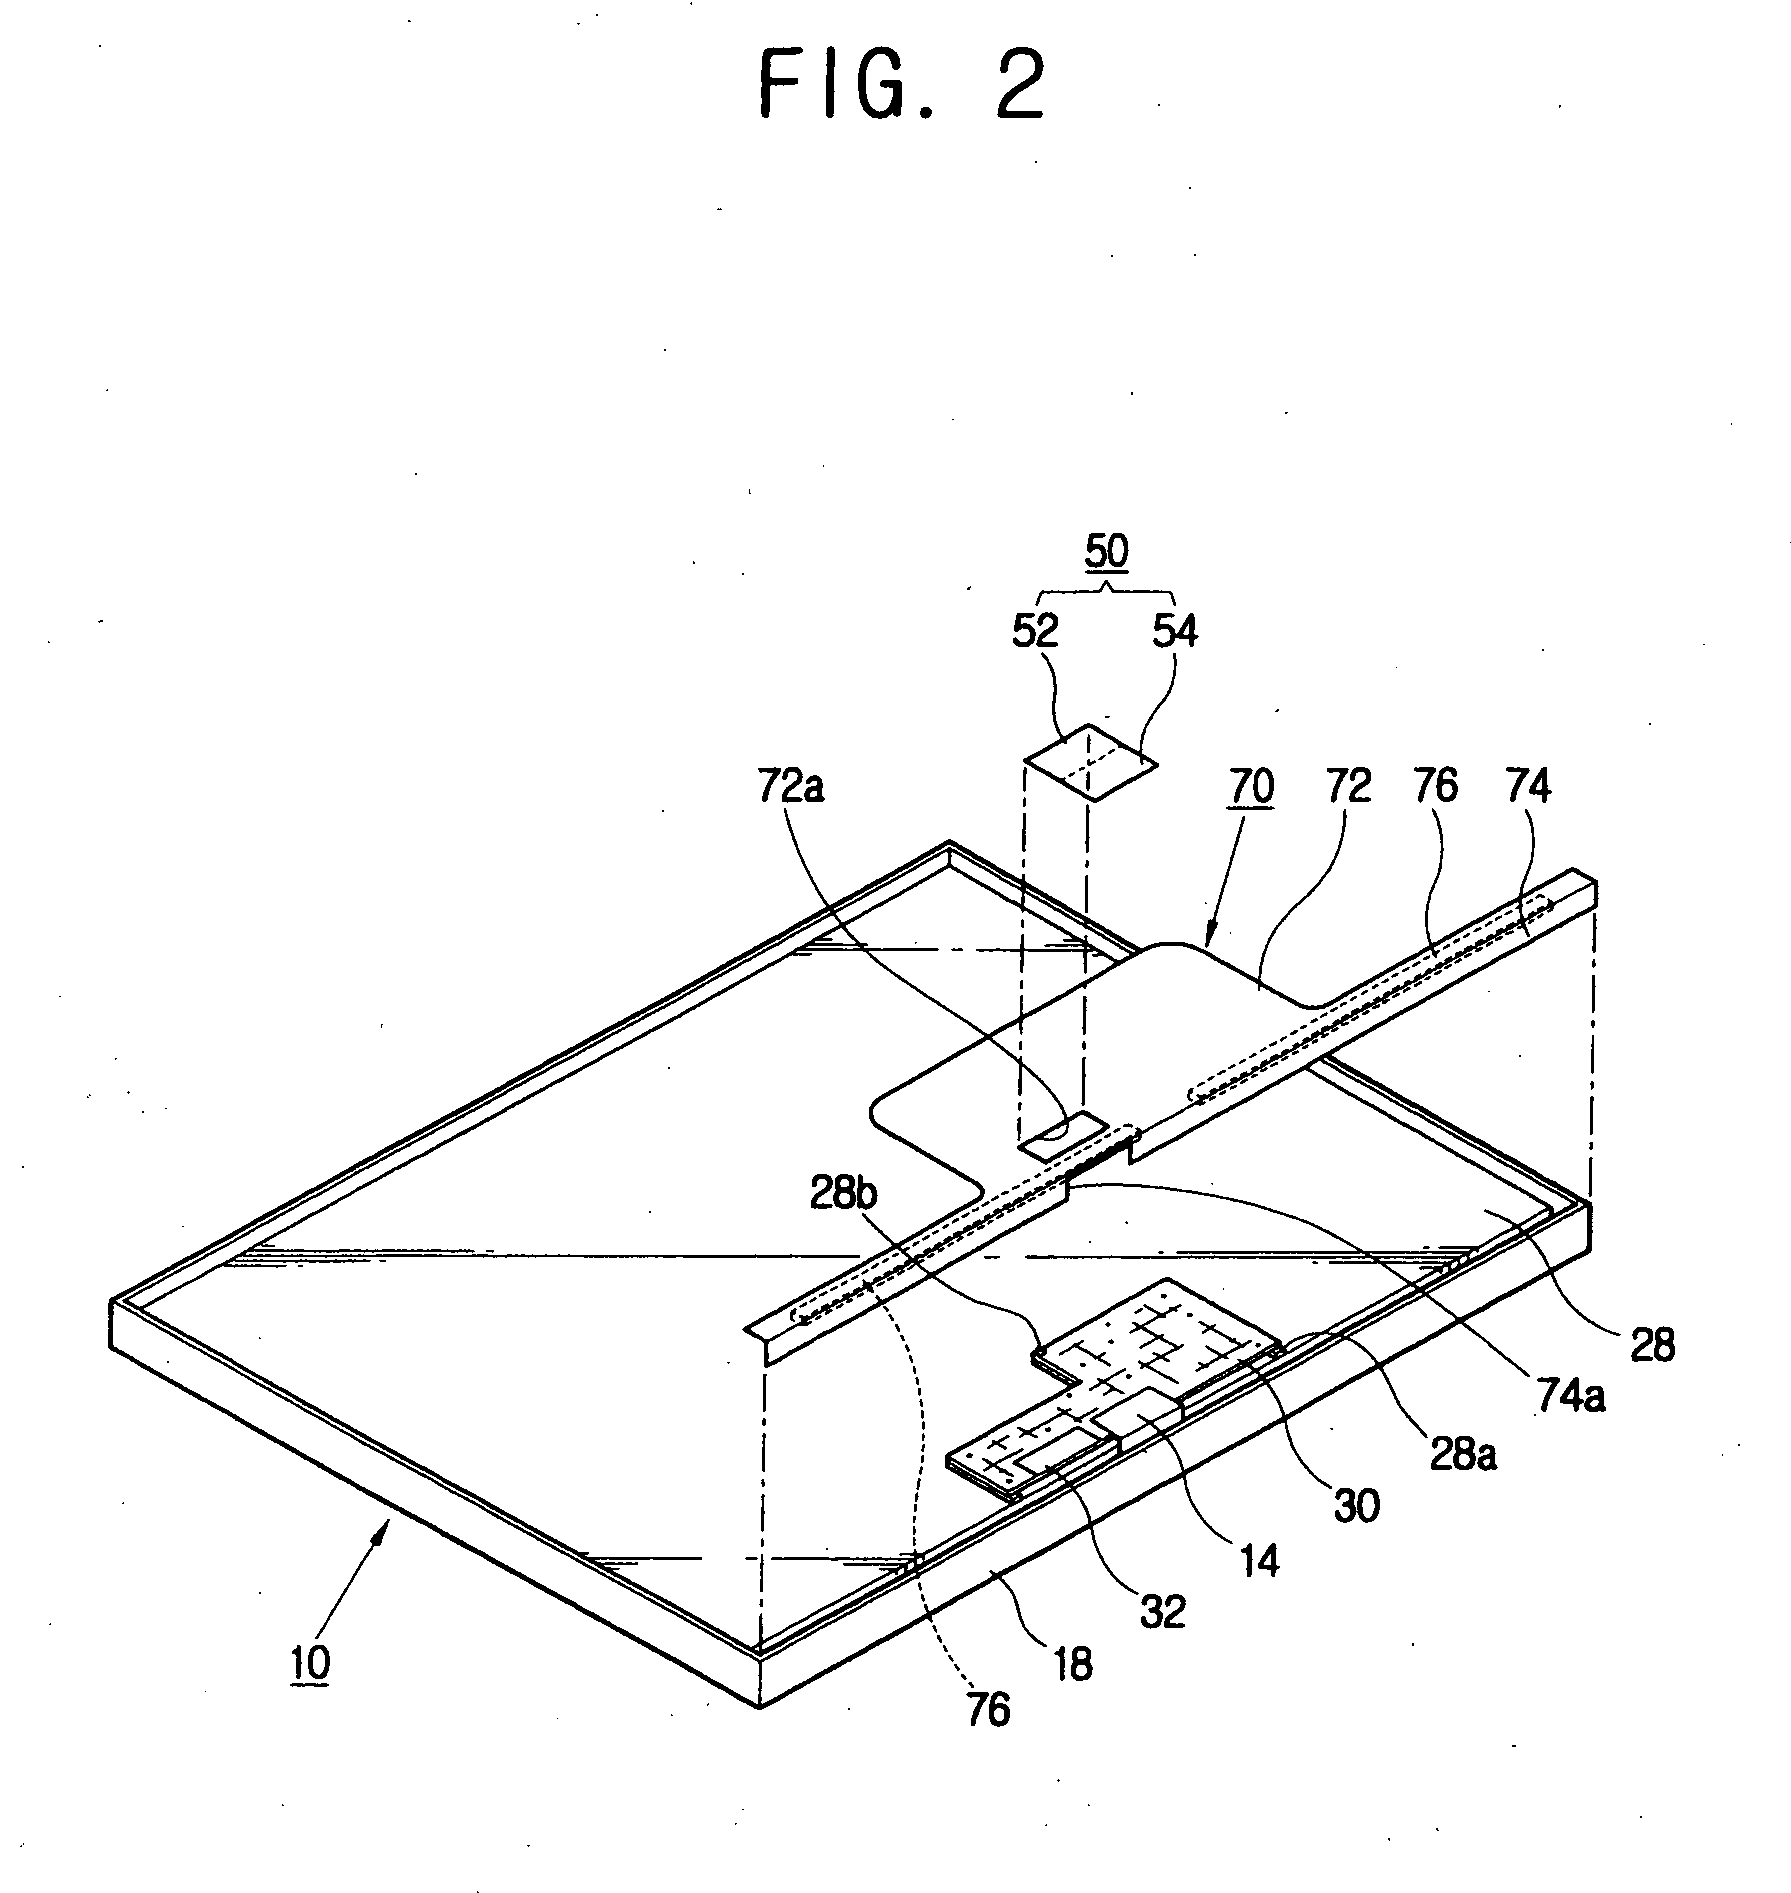 Flat panel display apparatus with grounded PCB